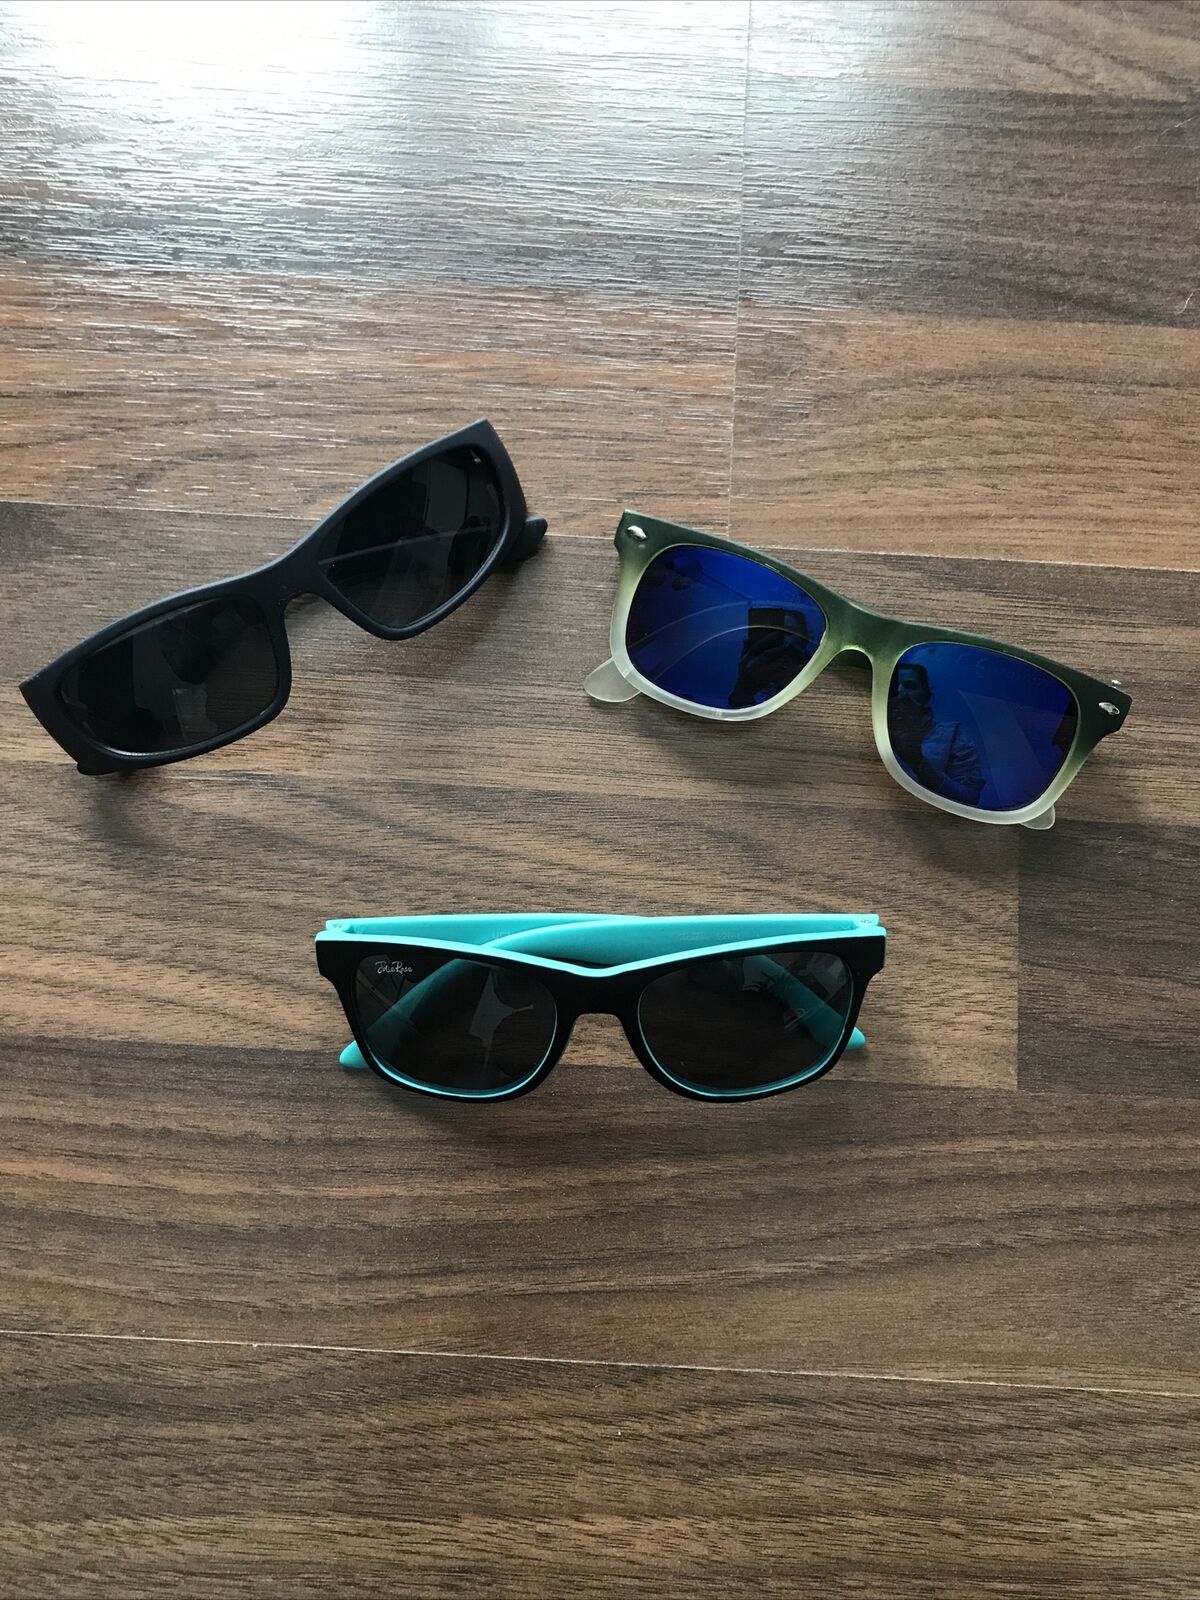 Set - 3 Boys Max 82% OFF Sunglasses condition Challenge the lowest price of Japan ☆ 1A